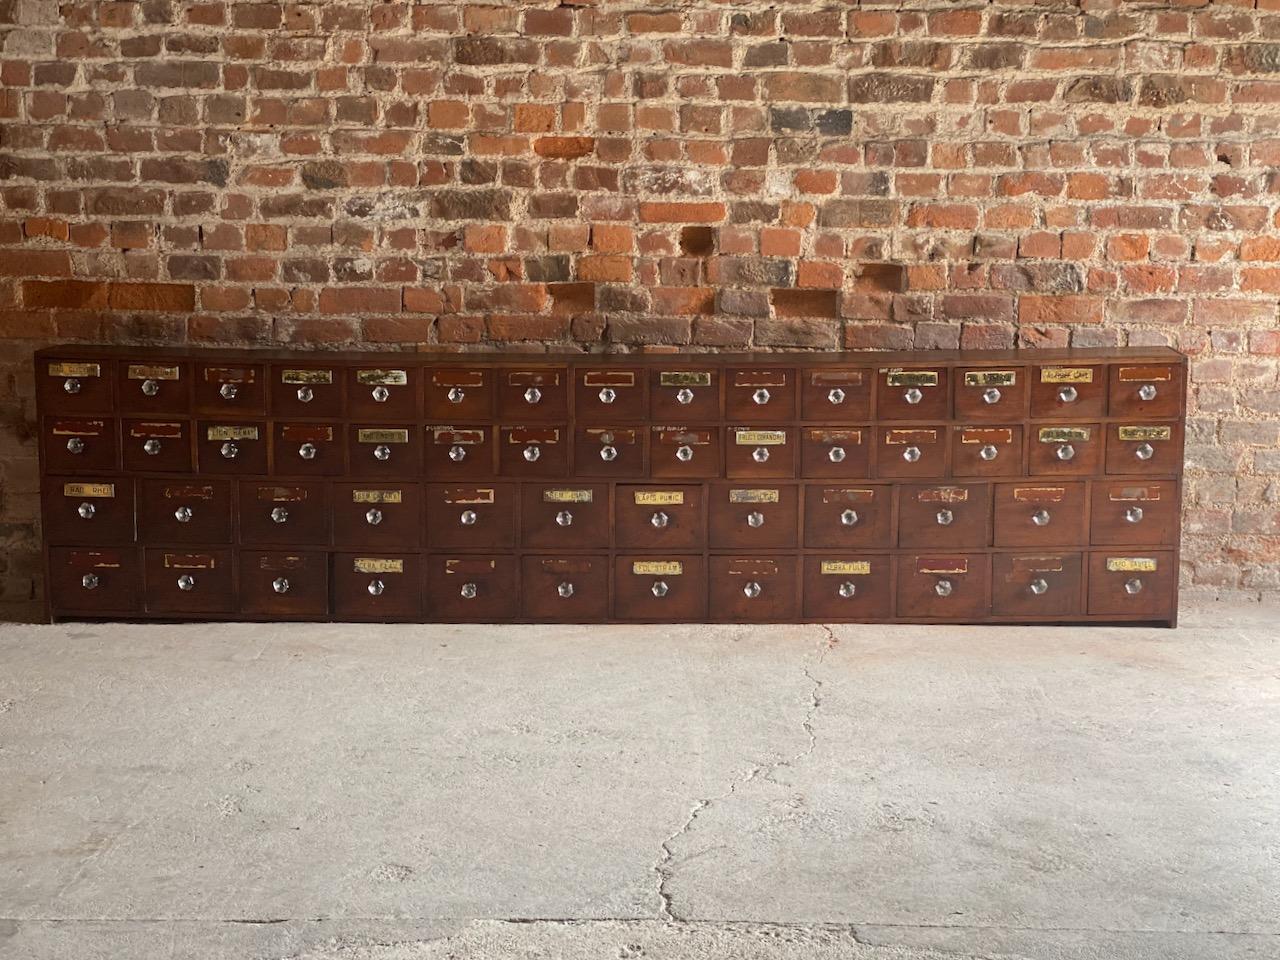 Antique Apothecary chest of drawers chemist pharmacy Victorian circa 1870

A stunning and extremely large Victorian Apothecary Chemist of drawers or cabinet comprising of 54 drawers, extremely rare to find a set this large and still in tact. The